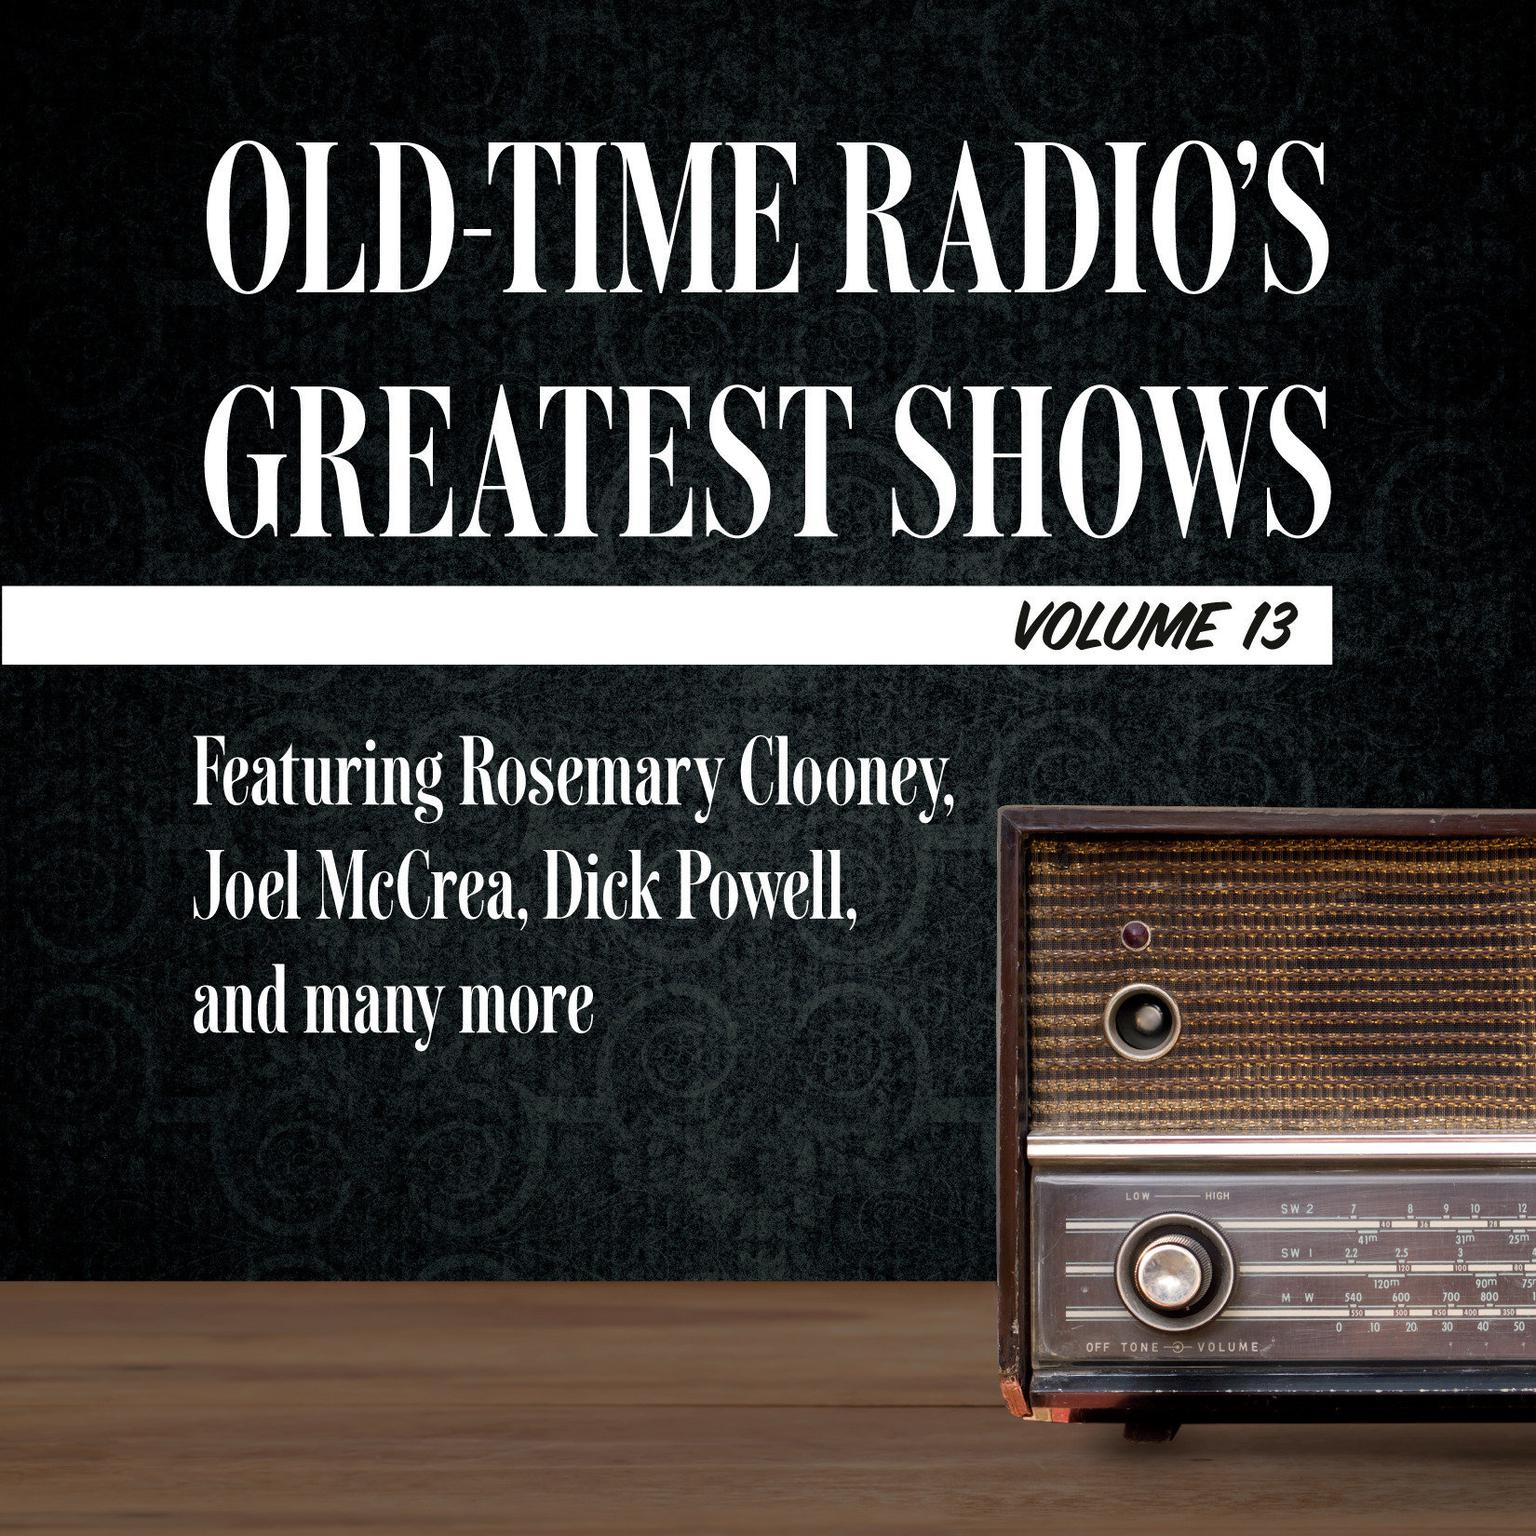 Old-Time Radios Greatest Shows, Volume 13: Featuring Rosemary Clooney, Joel McCrea, Dick Powell, and many more Audiobook, by Carl Amari